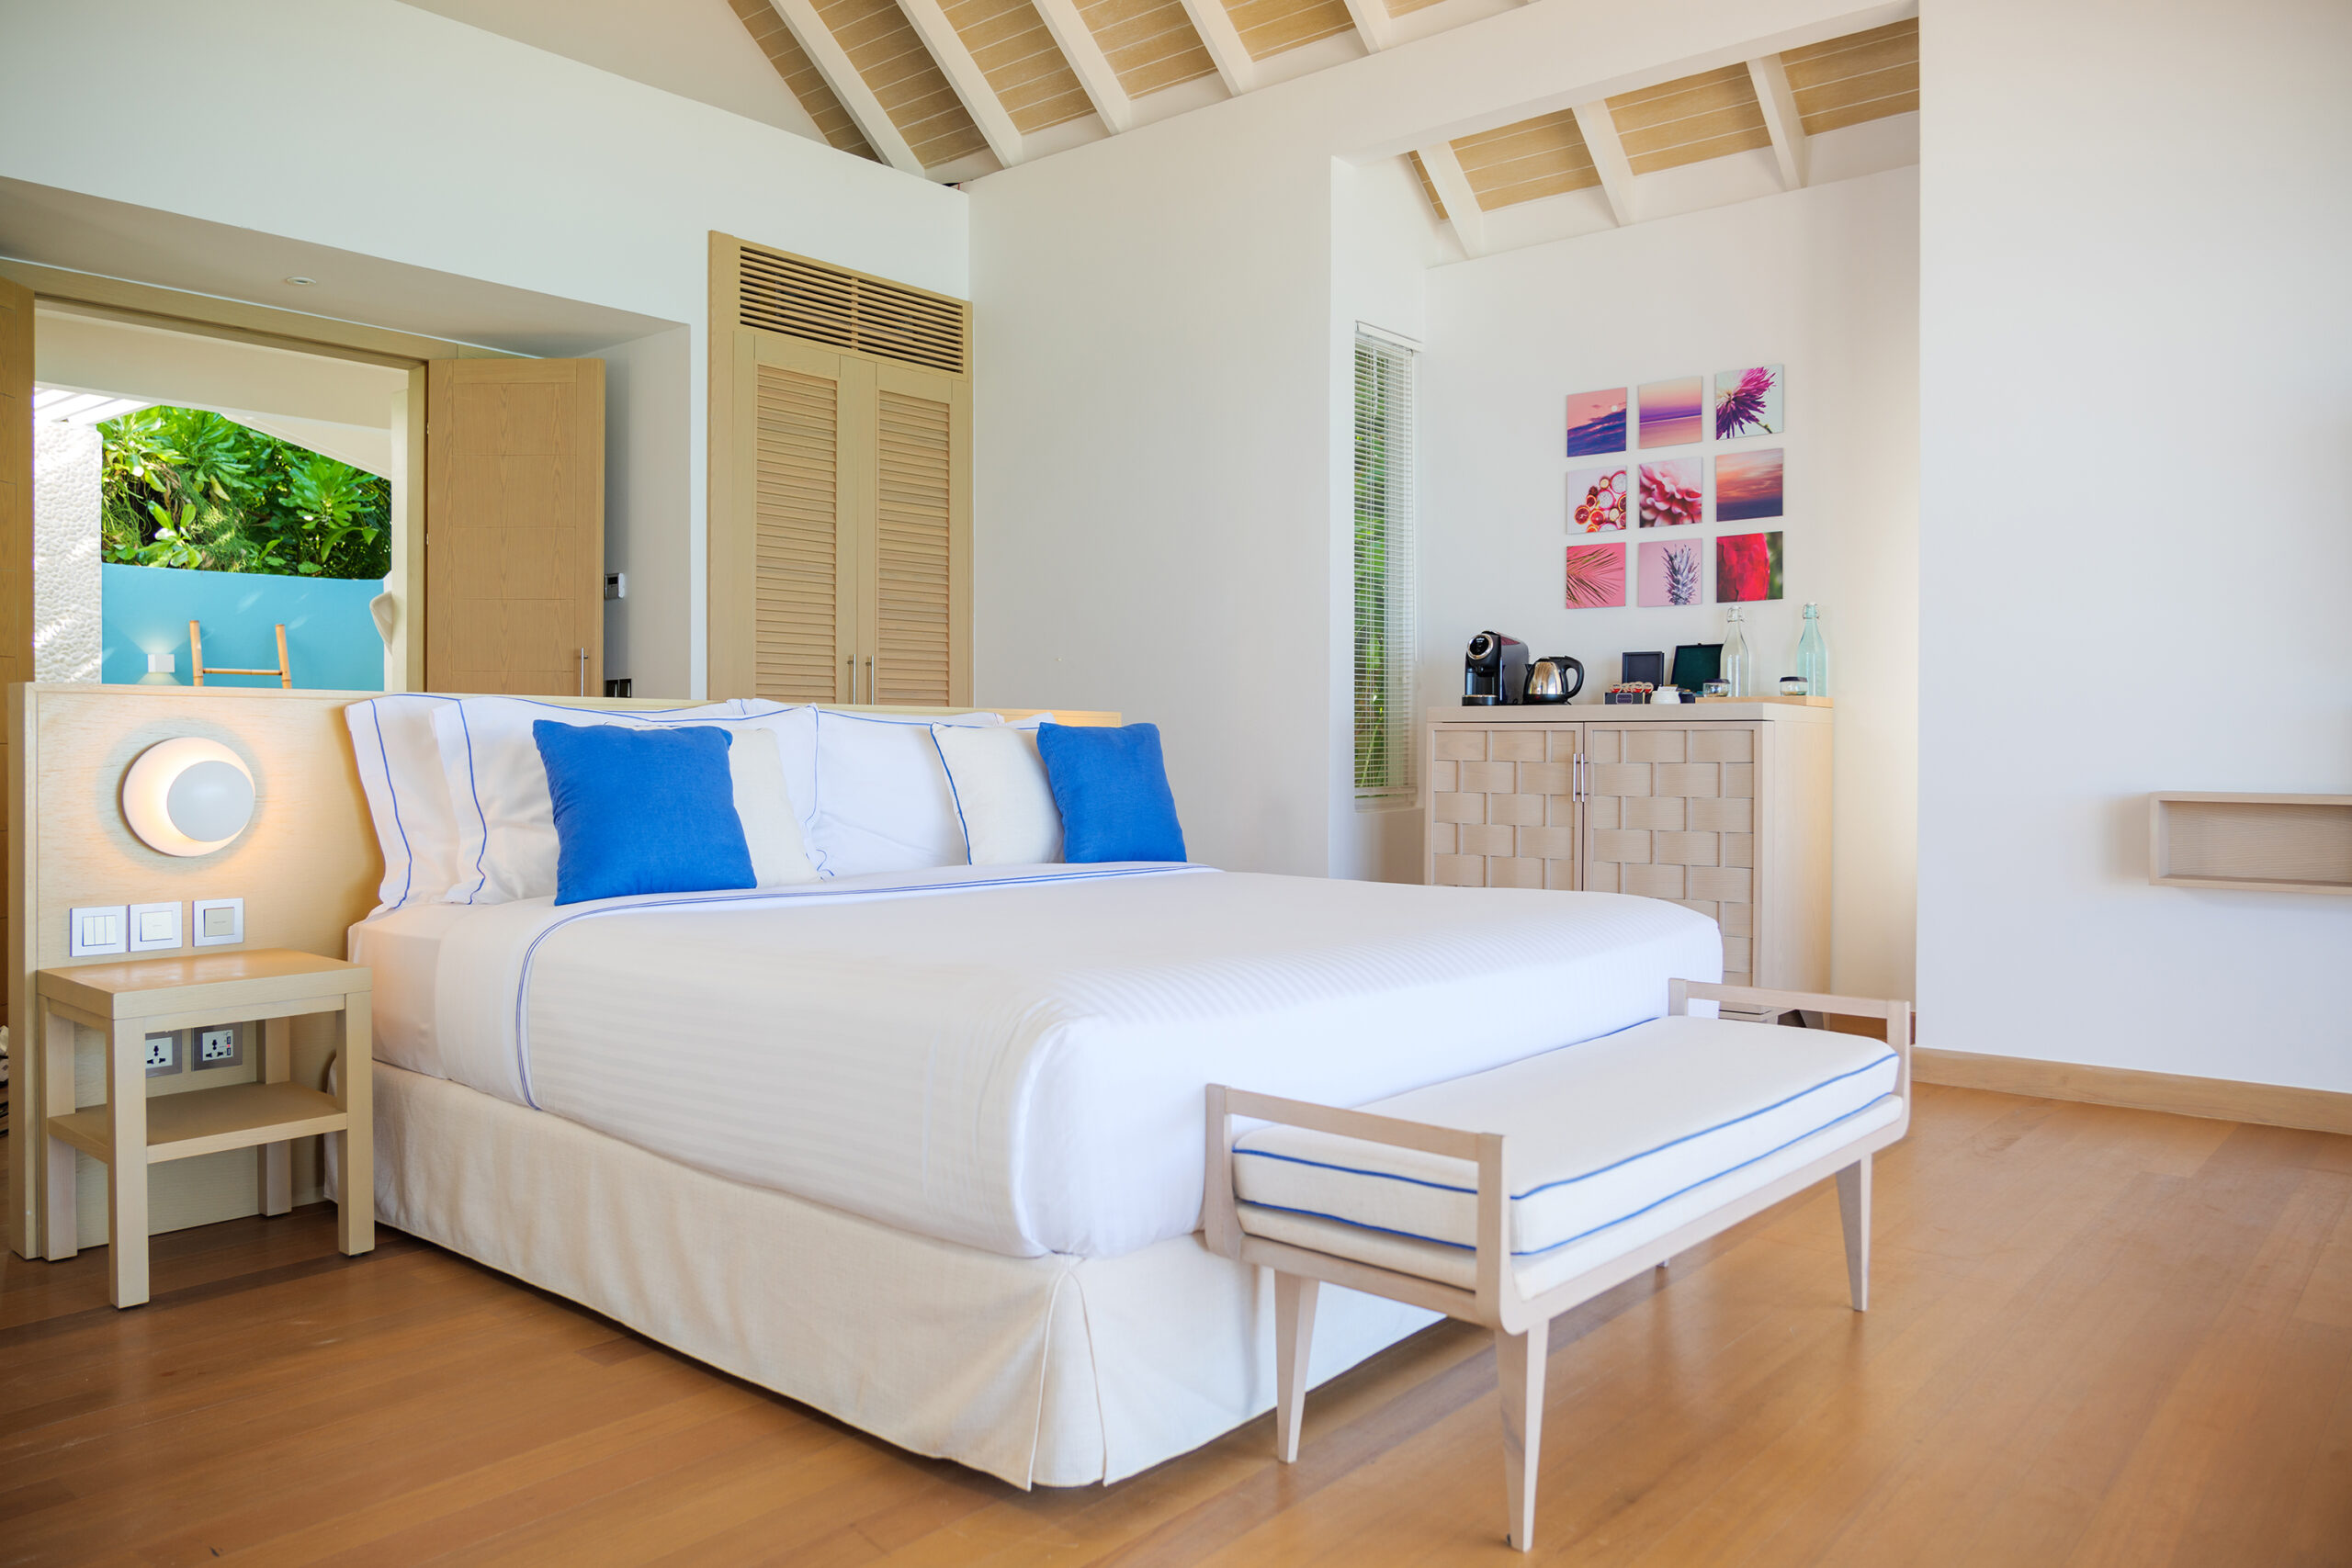 Baglioni_Resort_Maldives_Two_bedroom_Beach_Suite_with_pool (6)